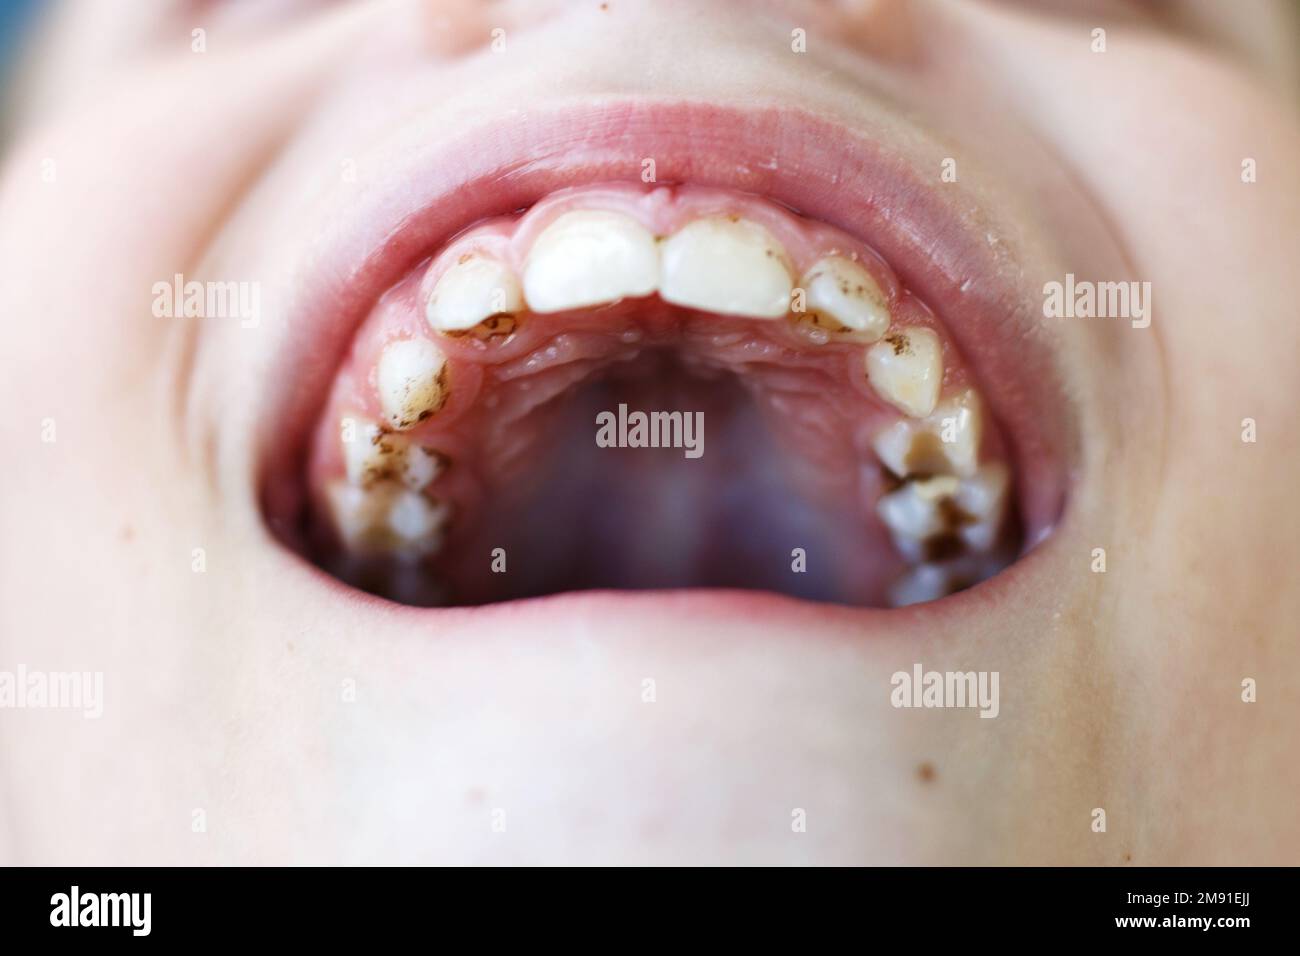 open mouth of a child boy with plaque or calculus on the teeth close. oral hygiene concept. Stock Photo